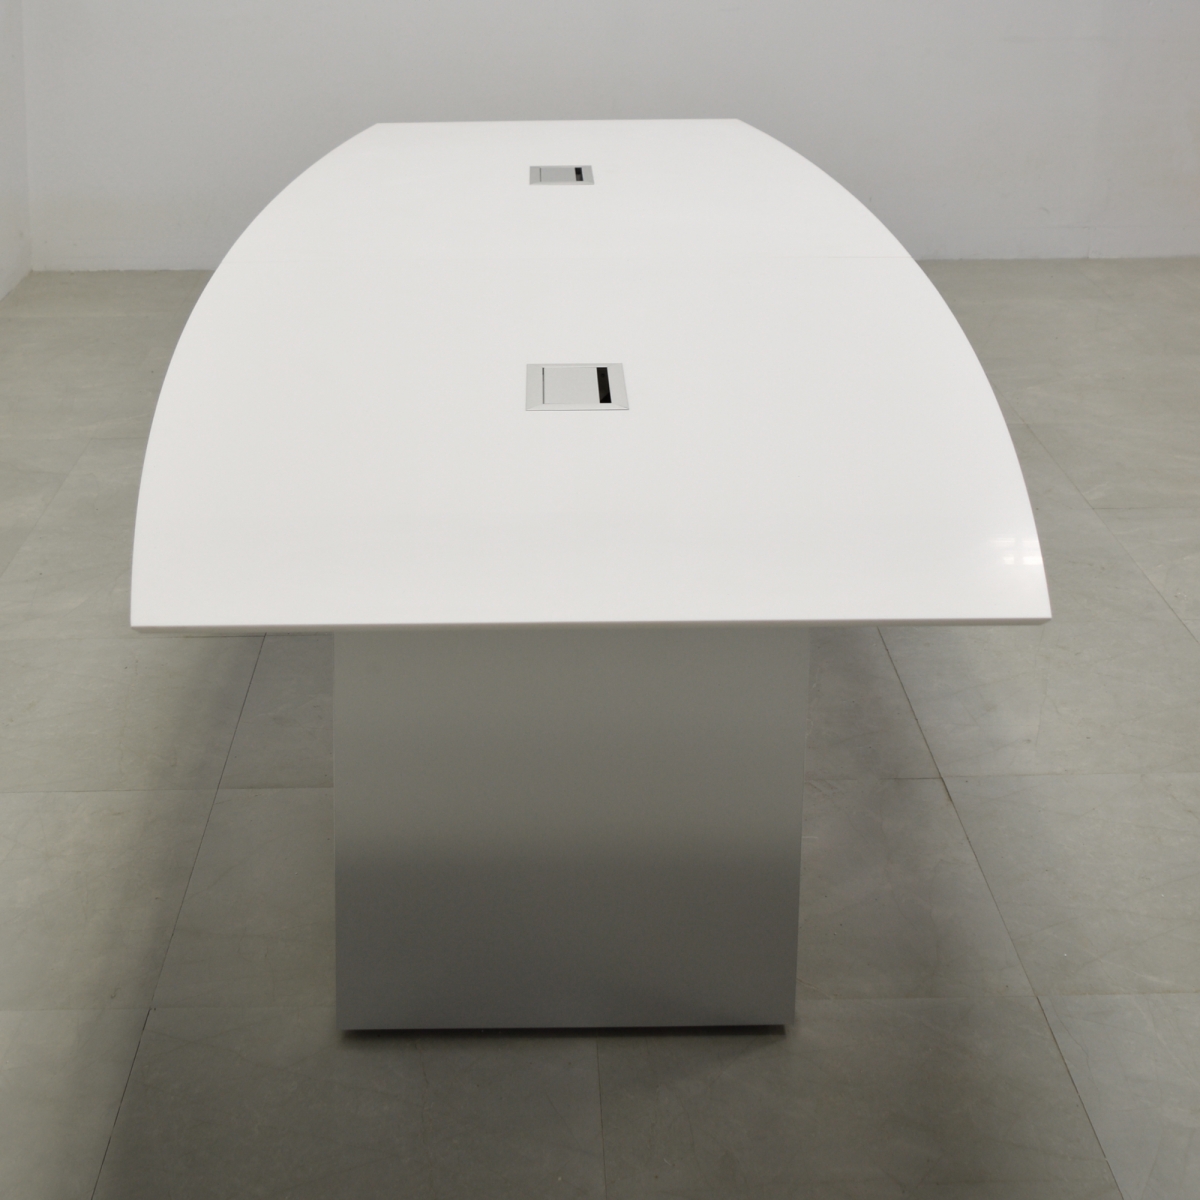 119 In. Axis Boat Conference Table - Stock #1001-S